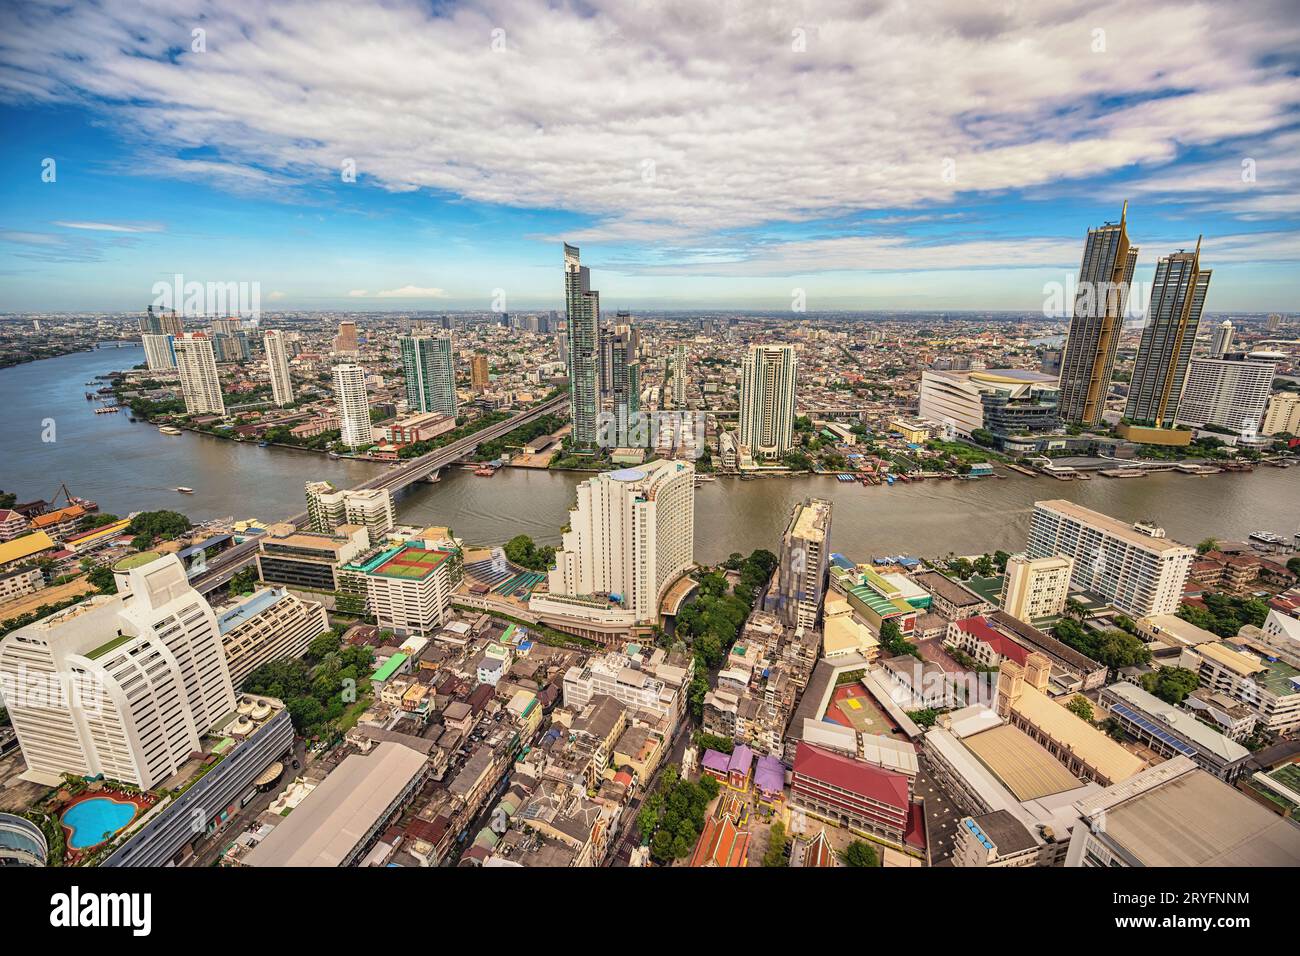 The Icon Siam Mall In Klongsan At The Chao Phraya River In The City Of  Bangkok In Thailand In Southest Asia. Thailand, Bangkok, November, 2019  Stock Photo, Picture And Royalty Free Image.